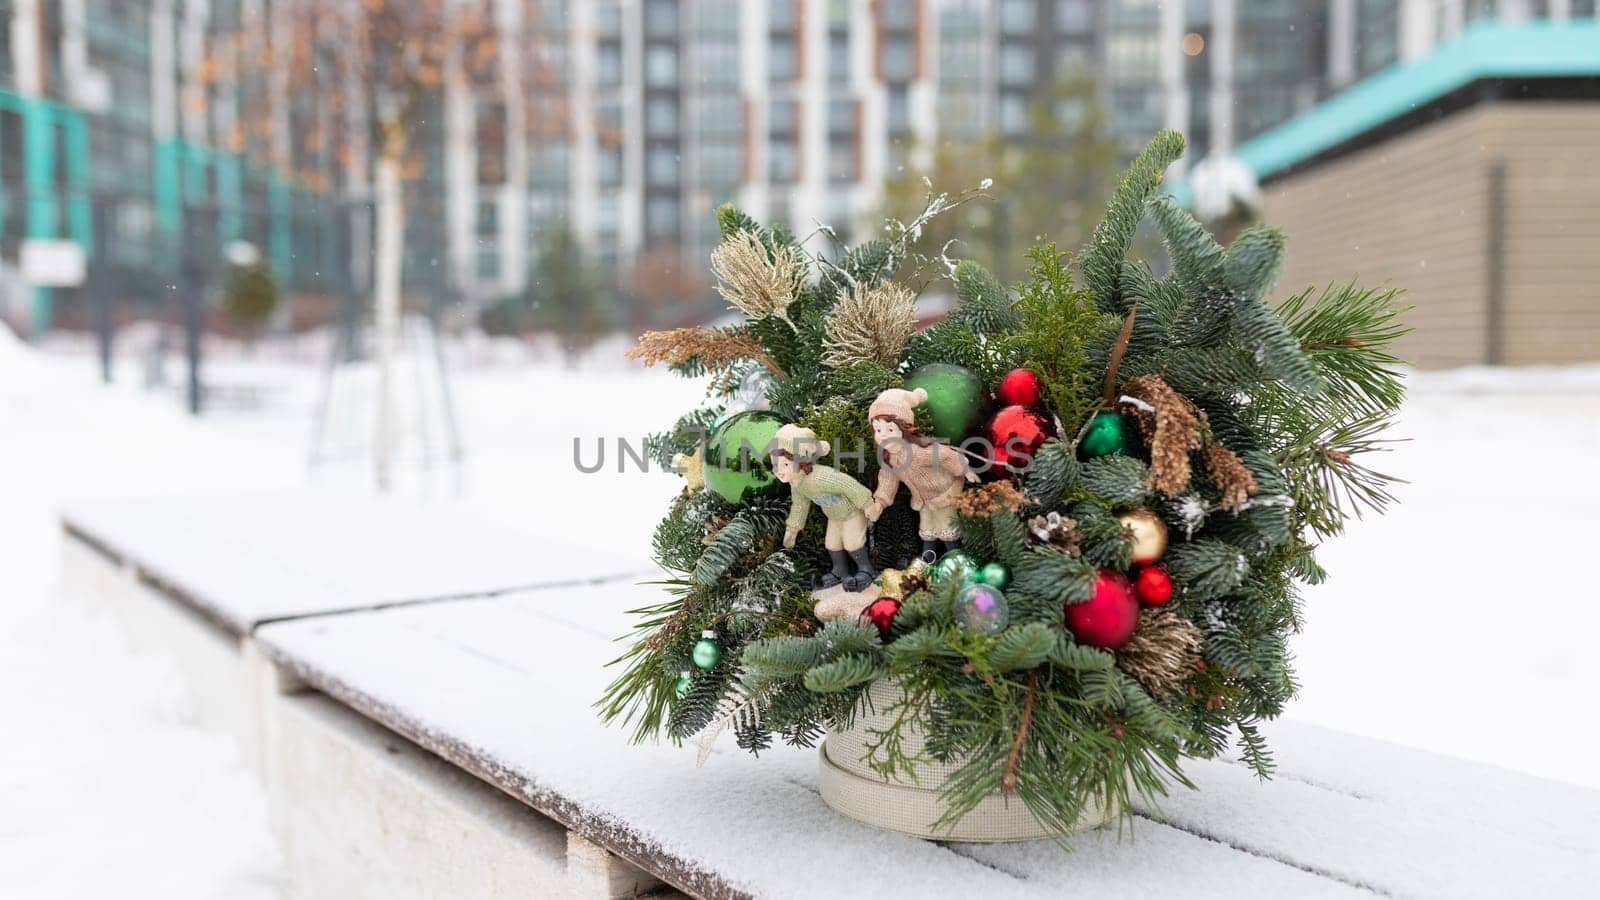 Potted Plant With Christmas Decorations on a Ledge by TRMK